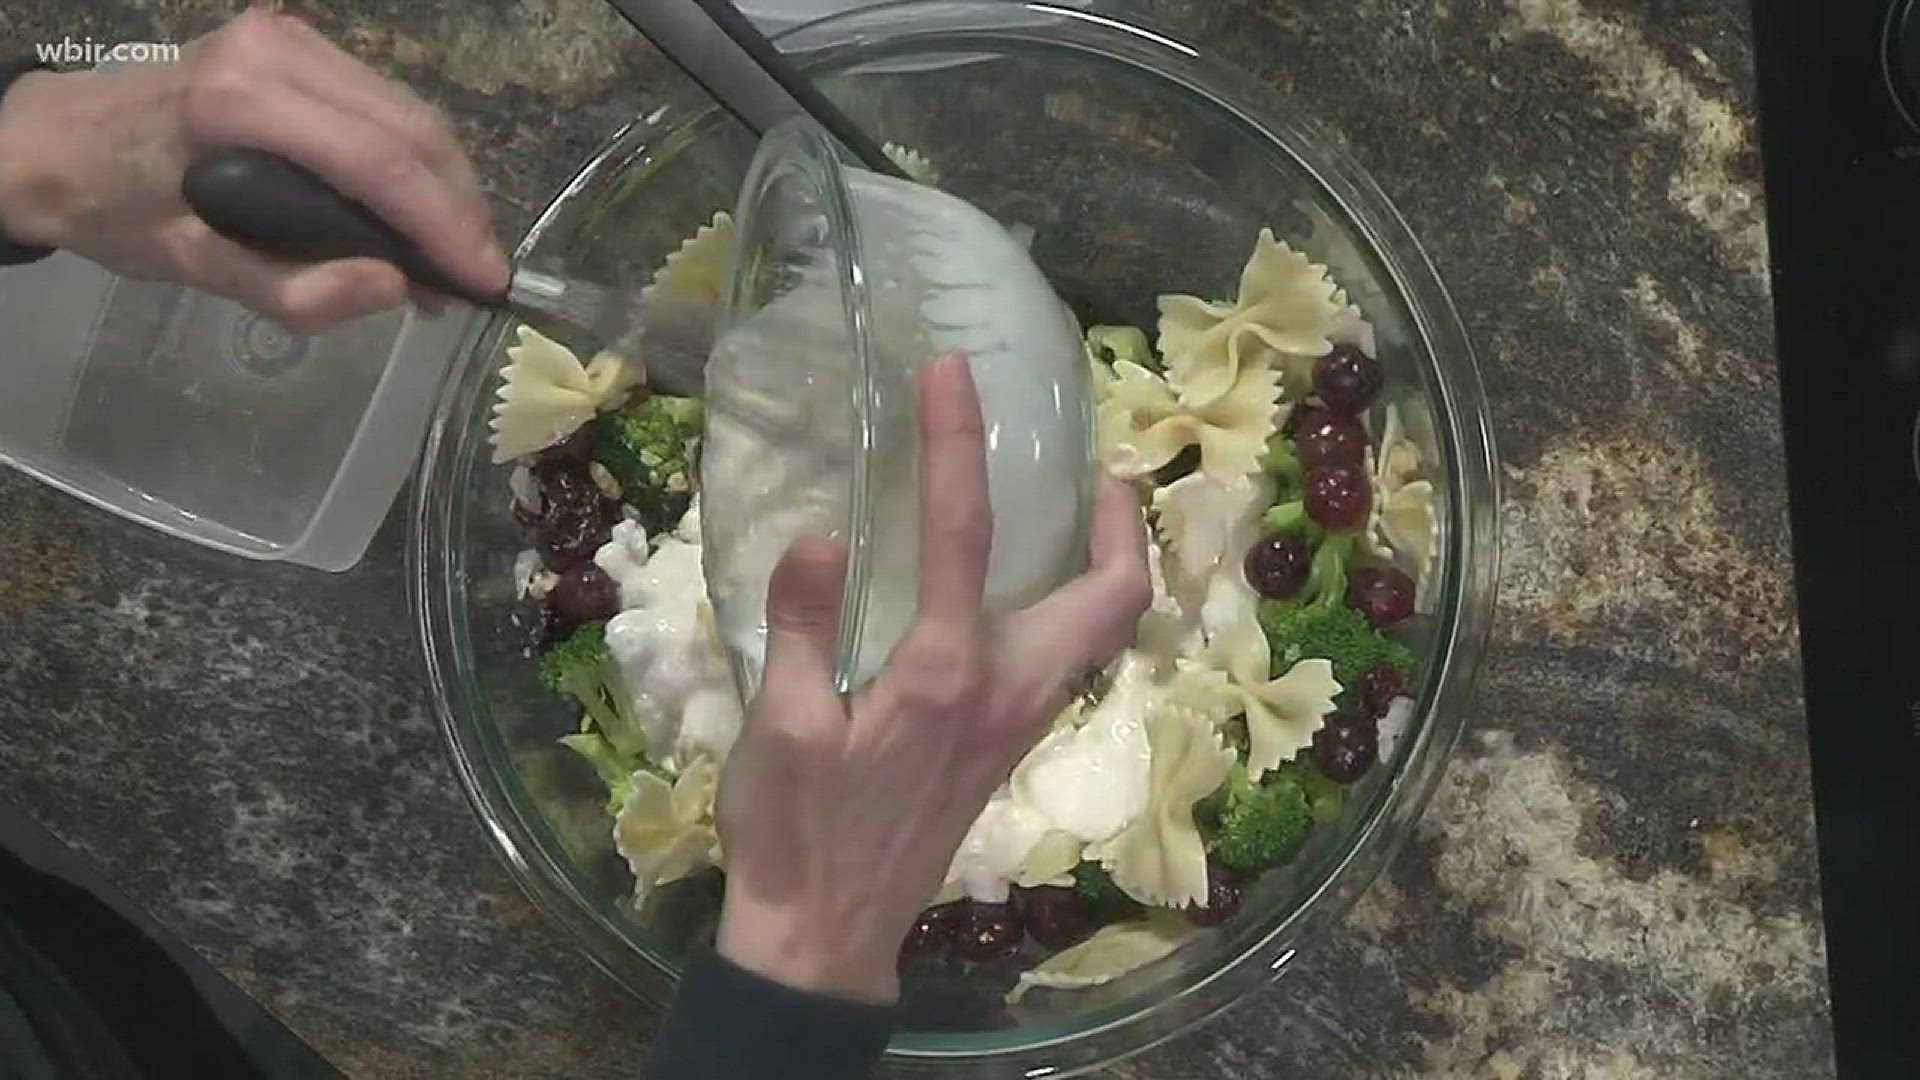 UT Medical Center shows us a lightened up version of the delicious pasta salad.